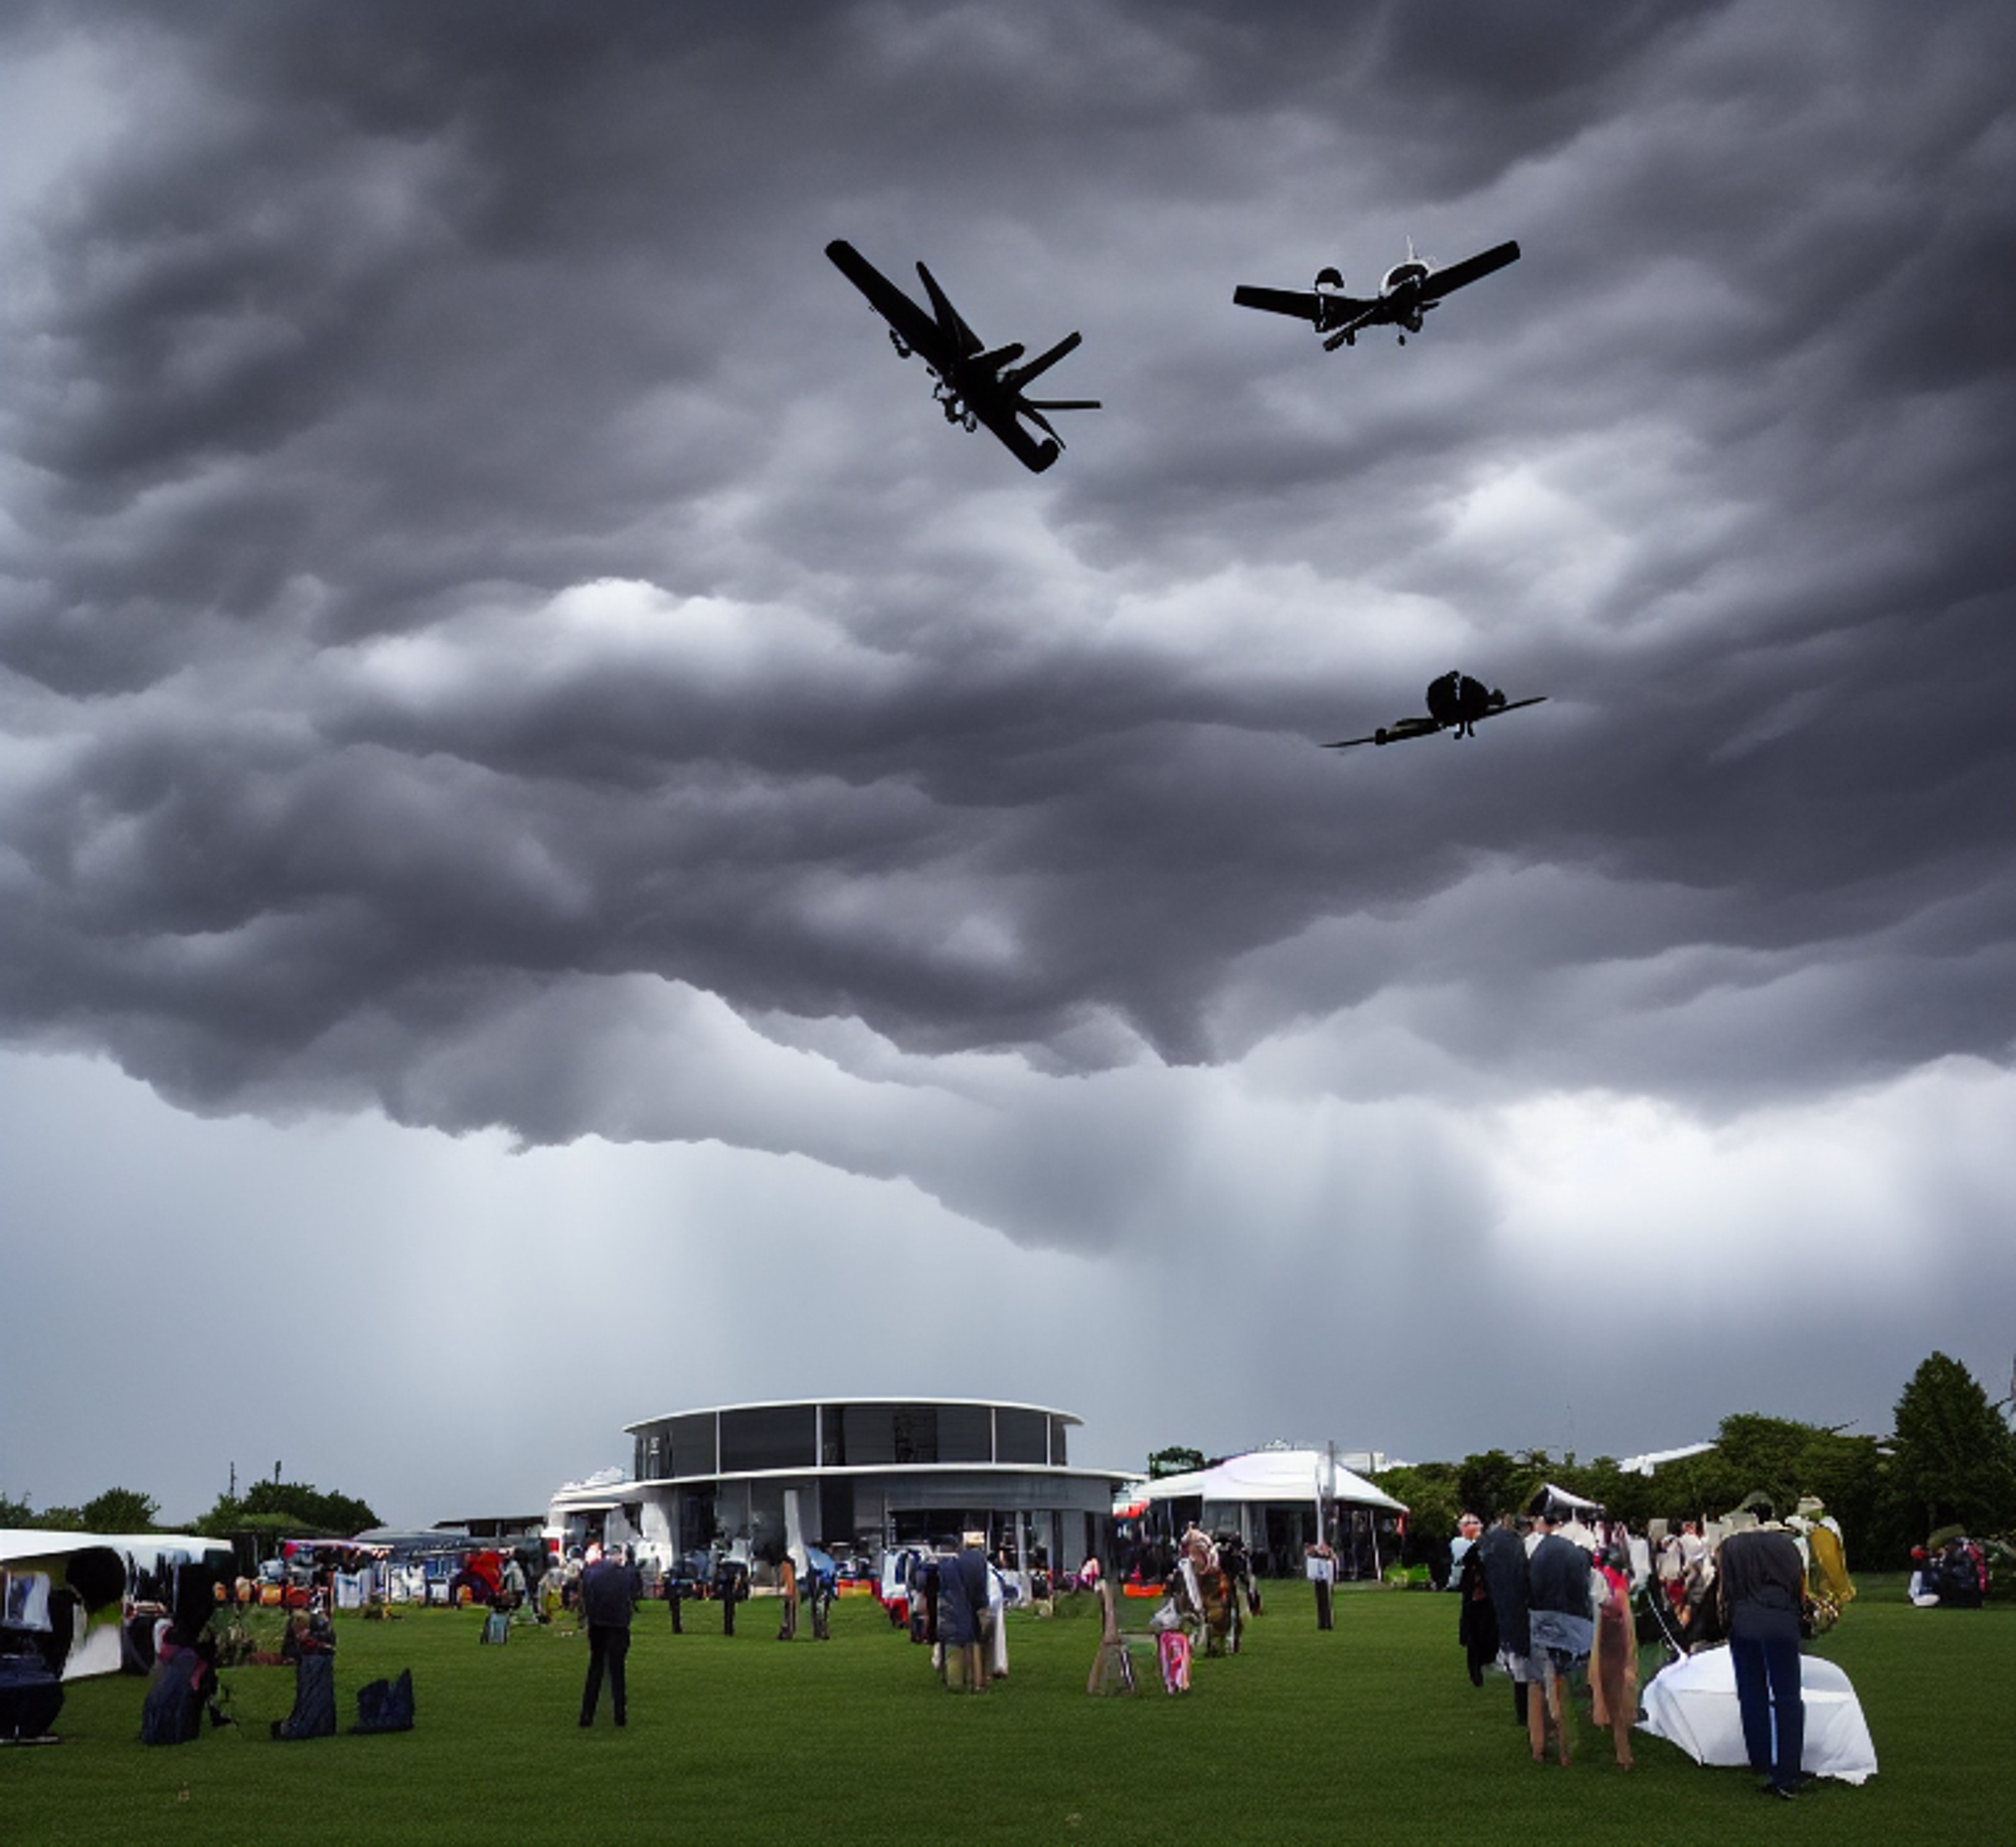 An art fair building threatened by a storm in a dramatic way with two planes in the air